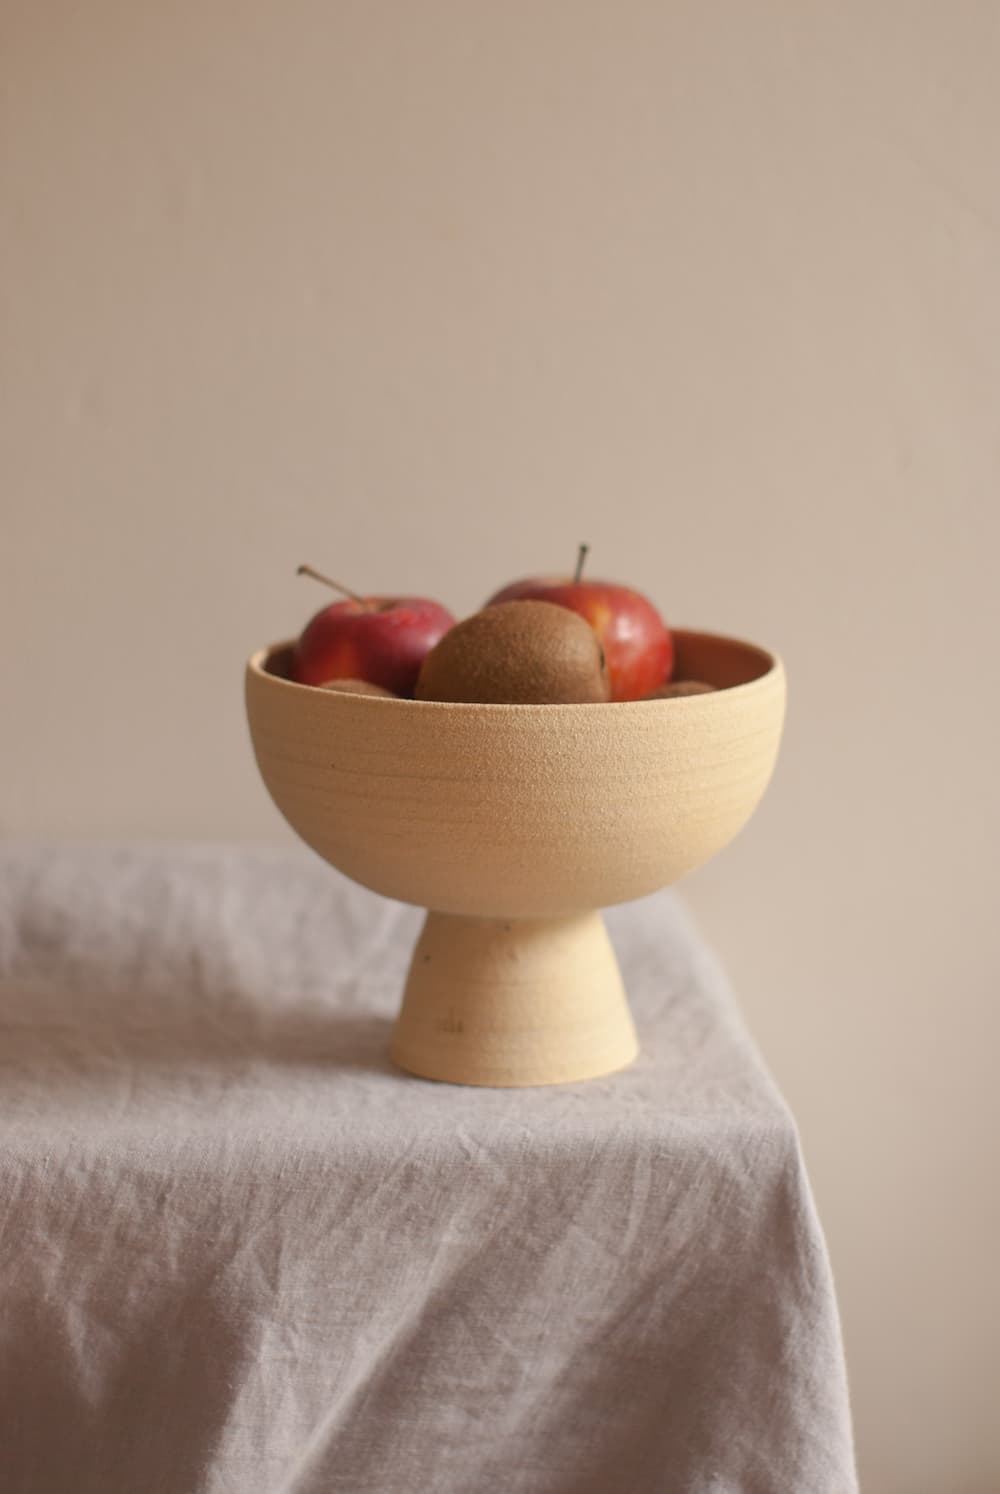 A wooden bowl filled with apples resting on   the   corner of a table that is draped in a grey tablecloth.